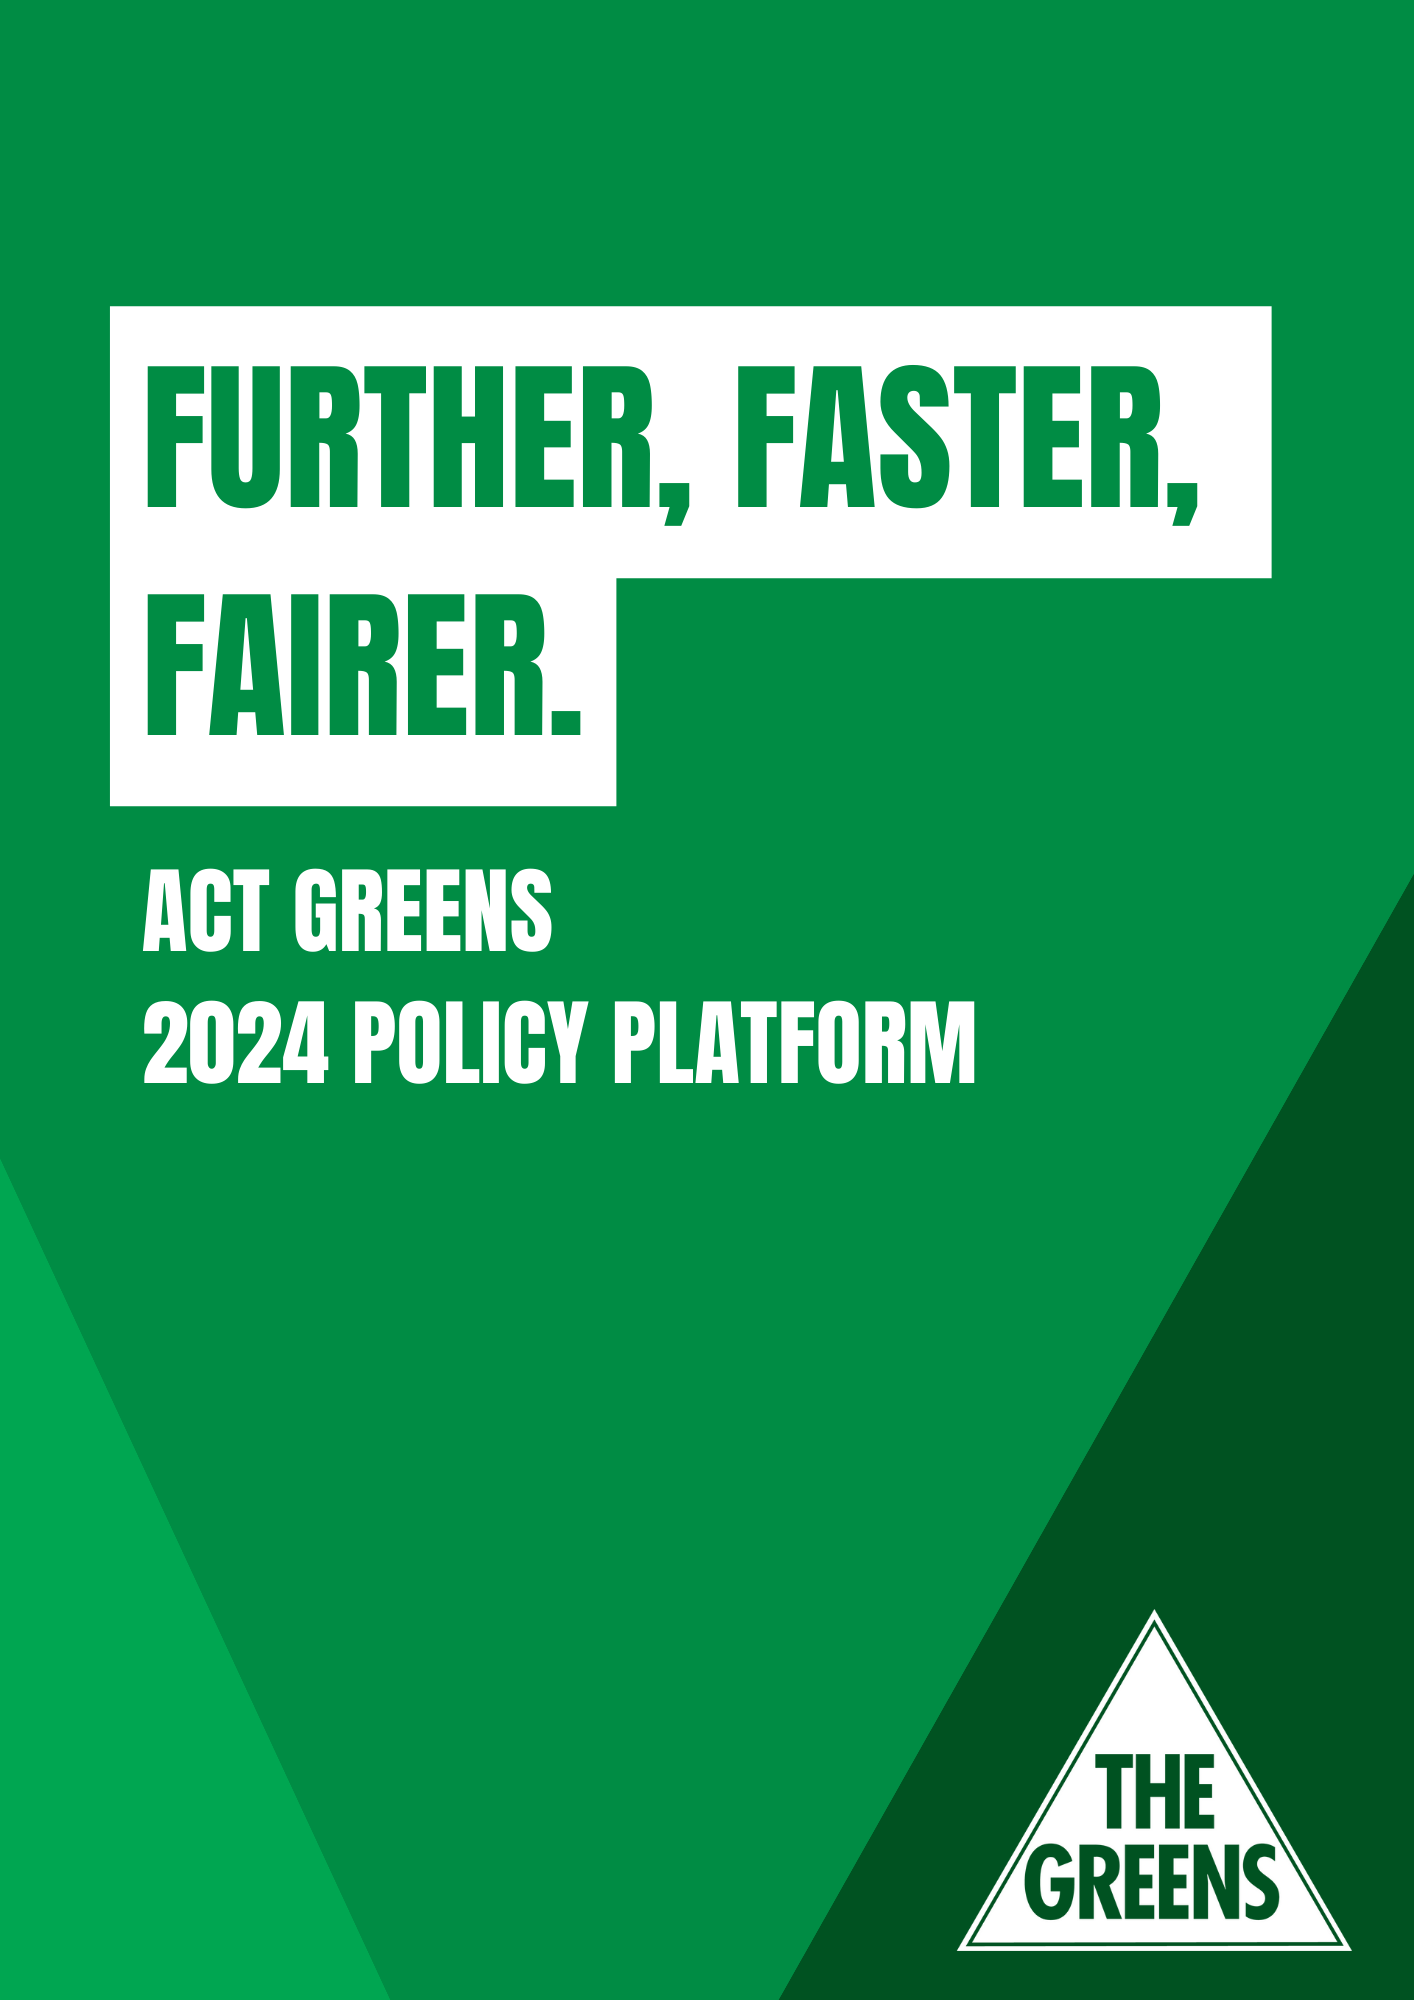 "Further, Faster, Fairer" The ACT Greens 2024 Policy Platform